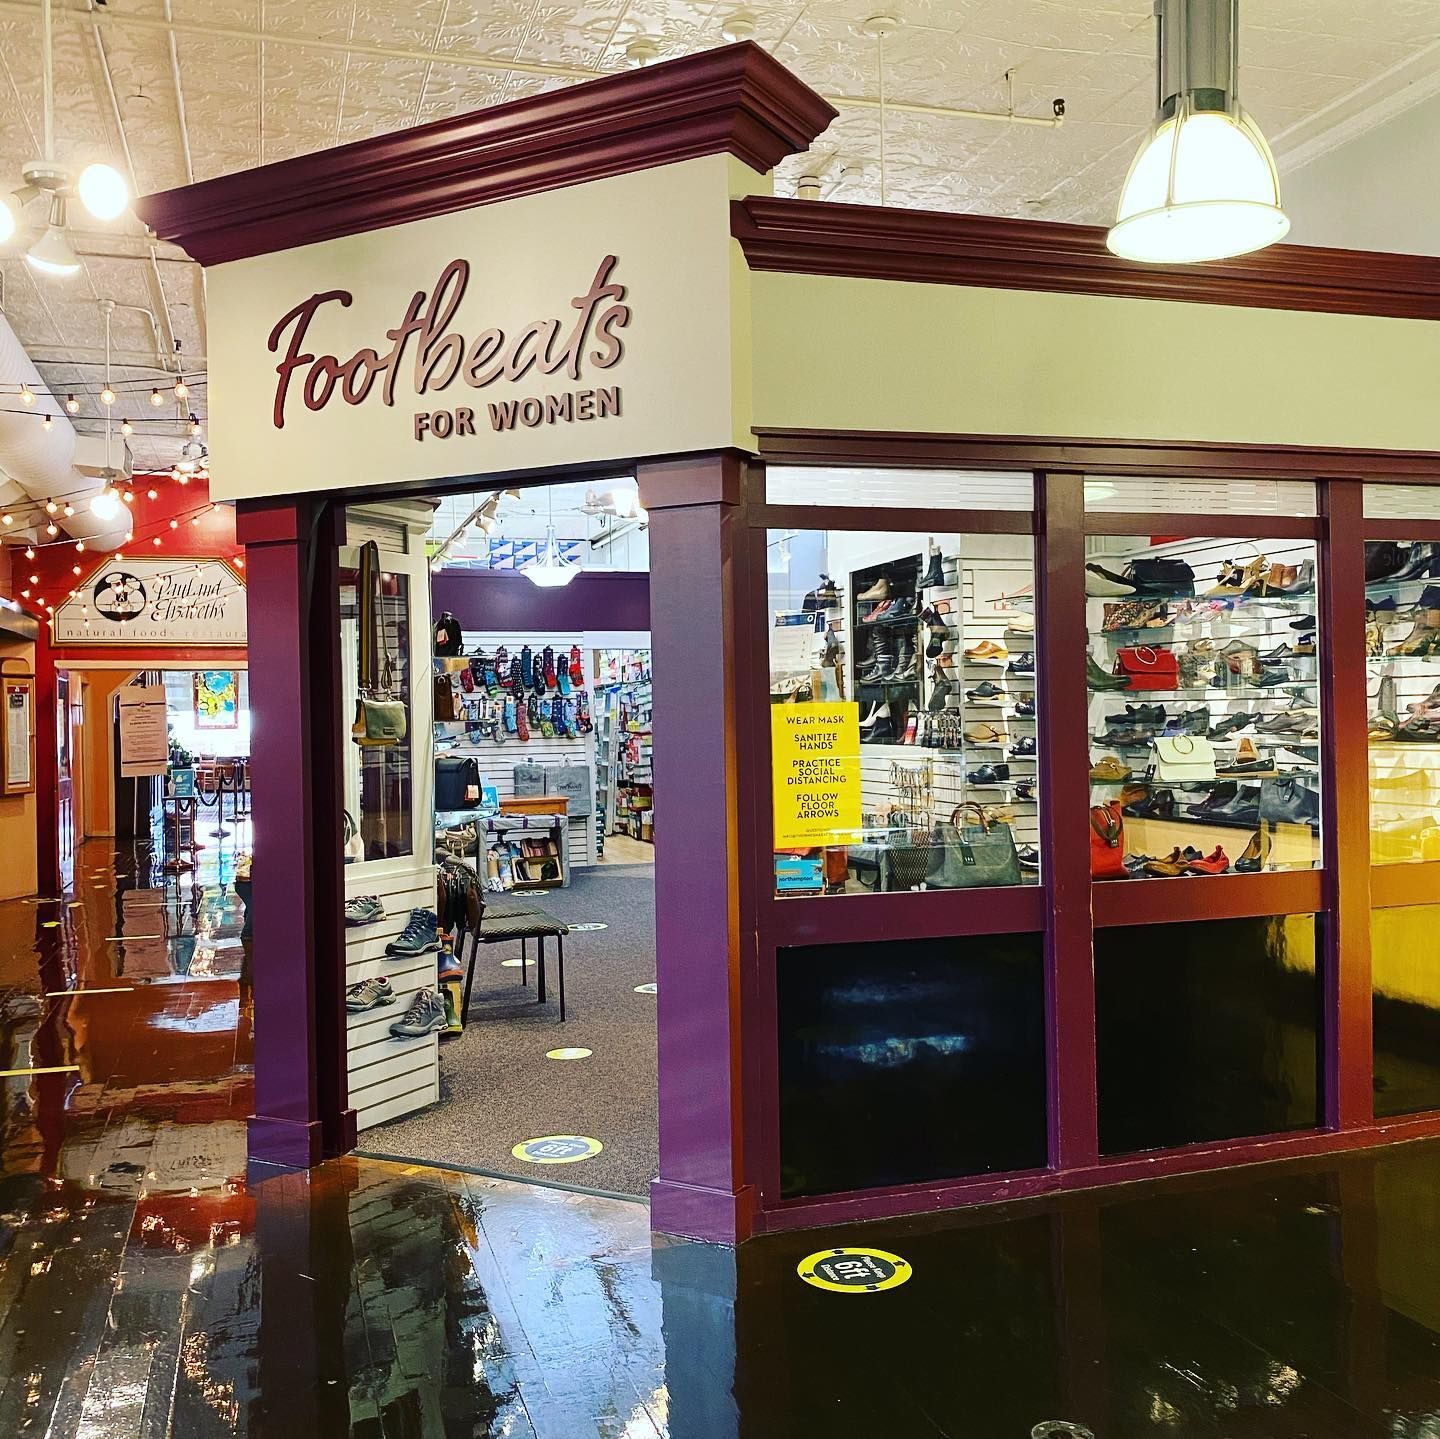 Footbeats for Women offers beautiful, high quality footwear in Thornes Marketplace